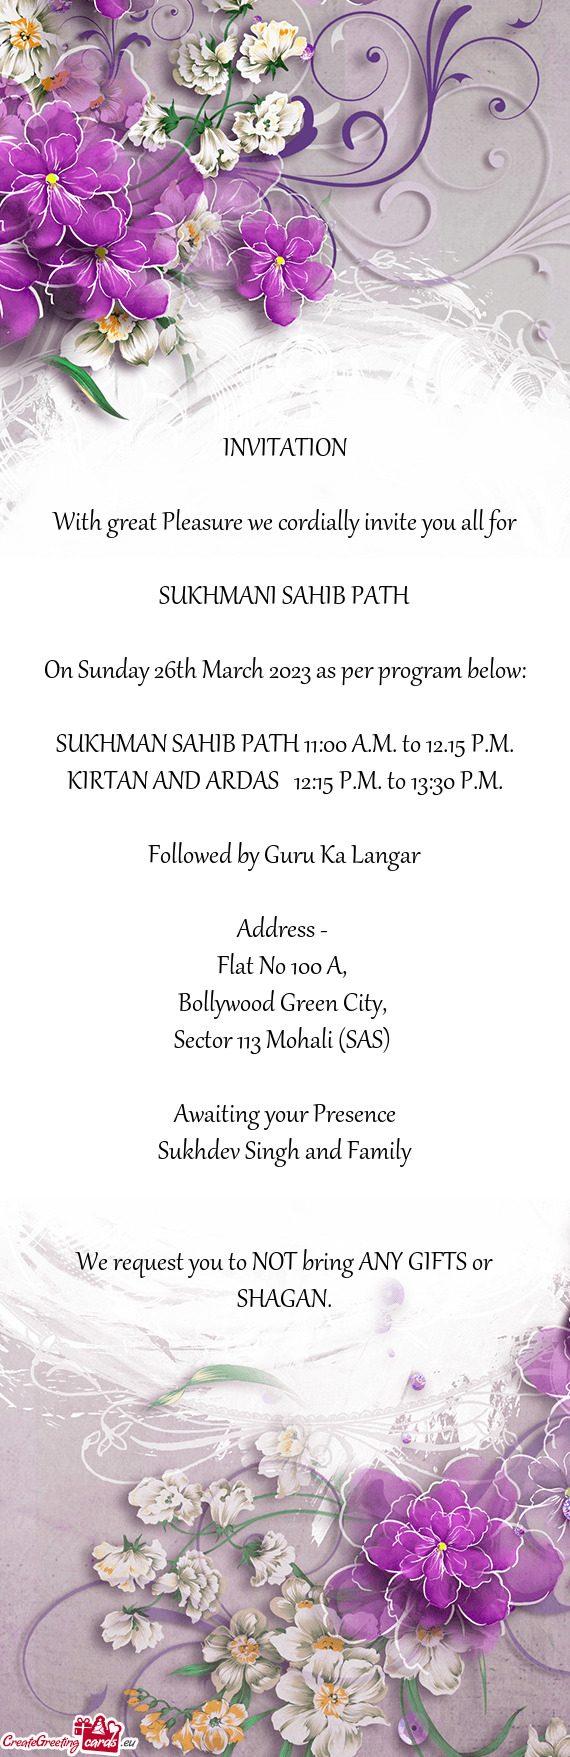 On Sunday 26th March 2023 as per program below